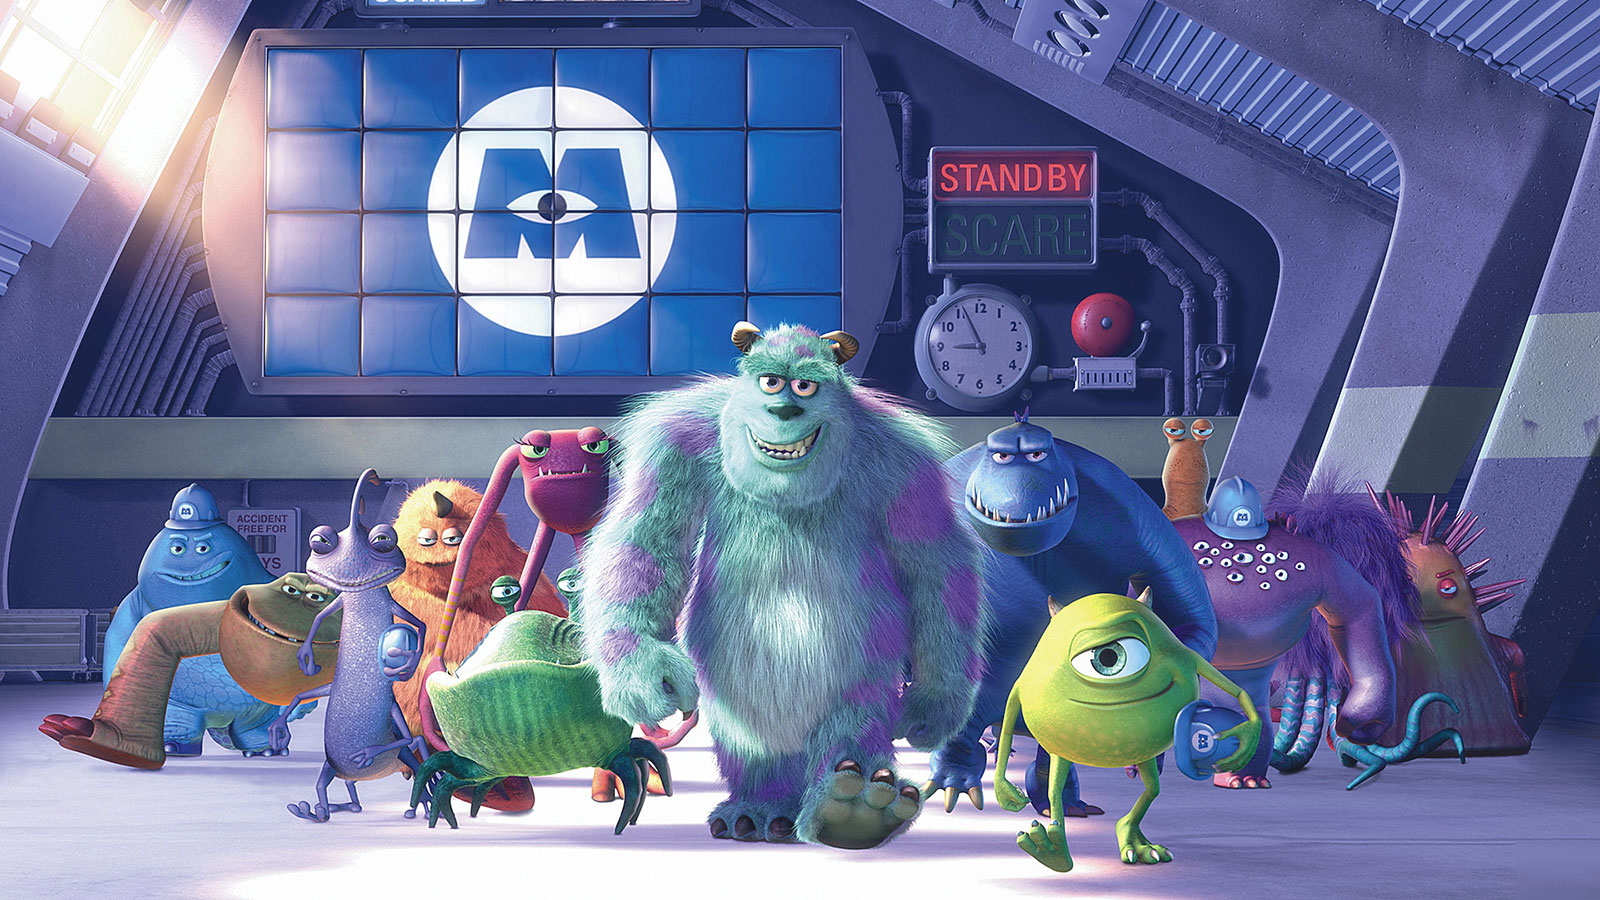 I Bet You Can’t Identify More Than 10/15 of These Pixar Movie Foods Monsters Inc